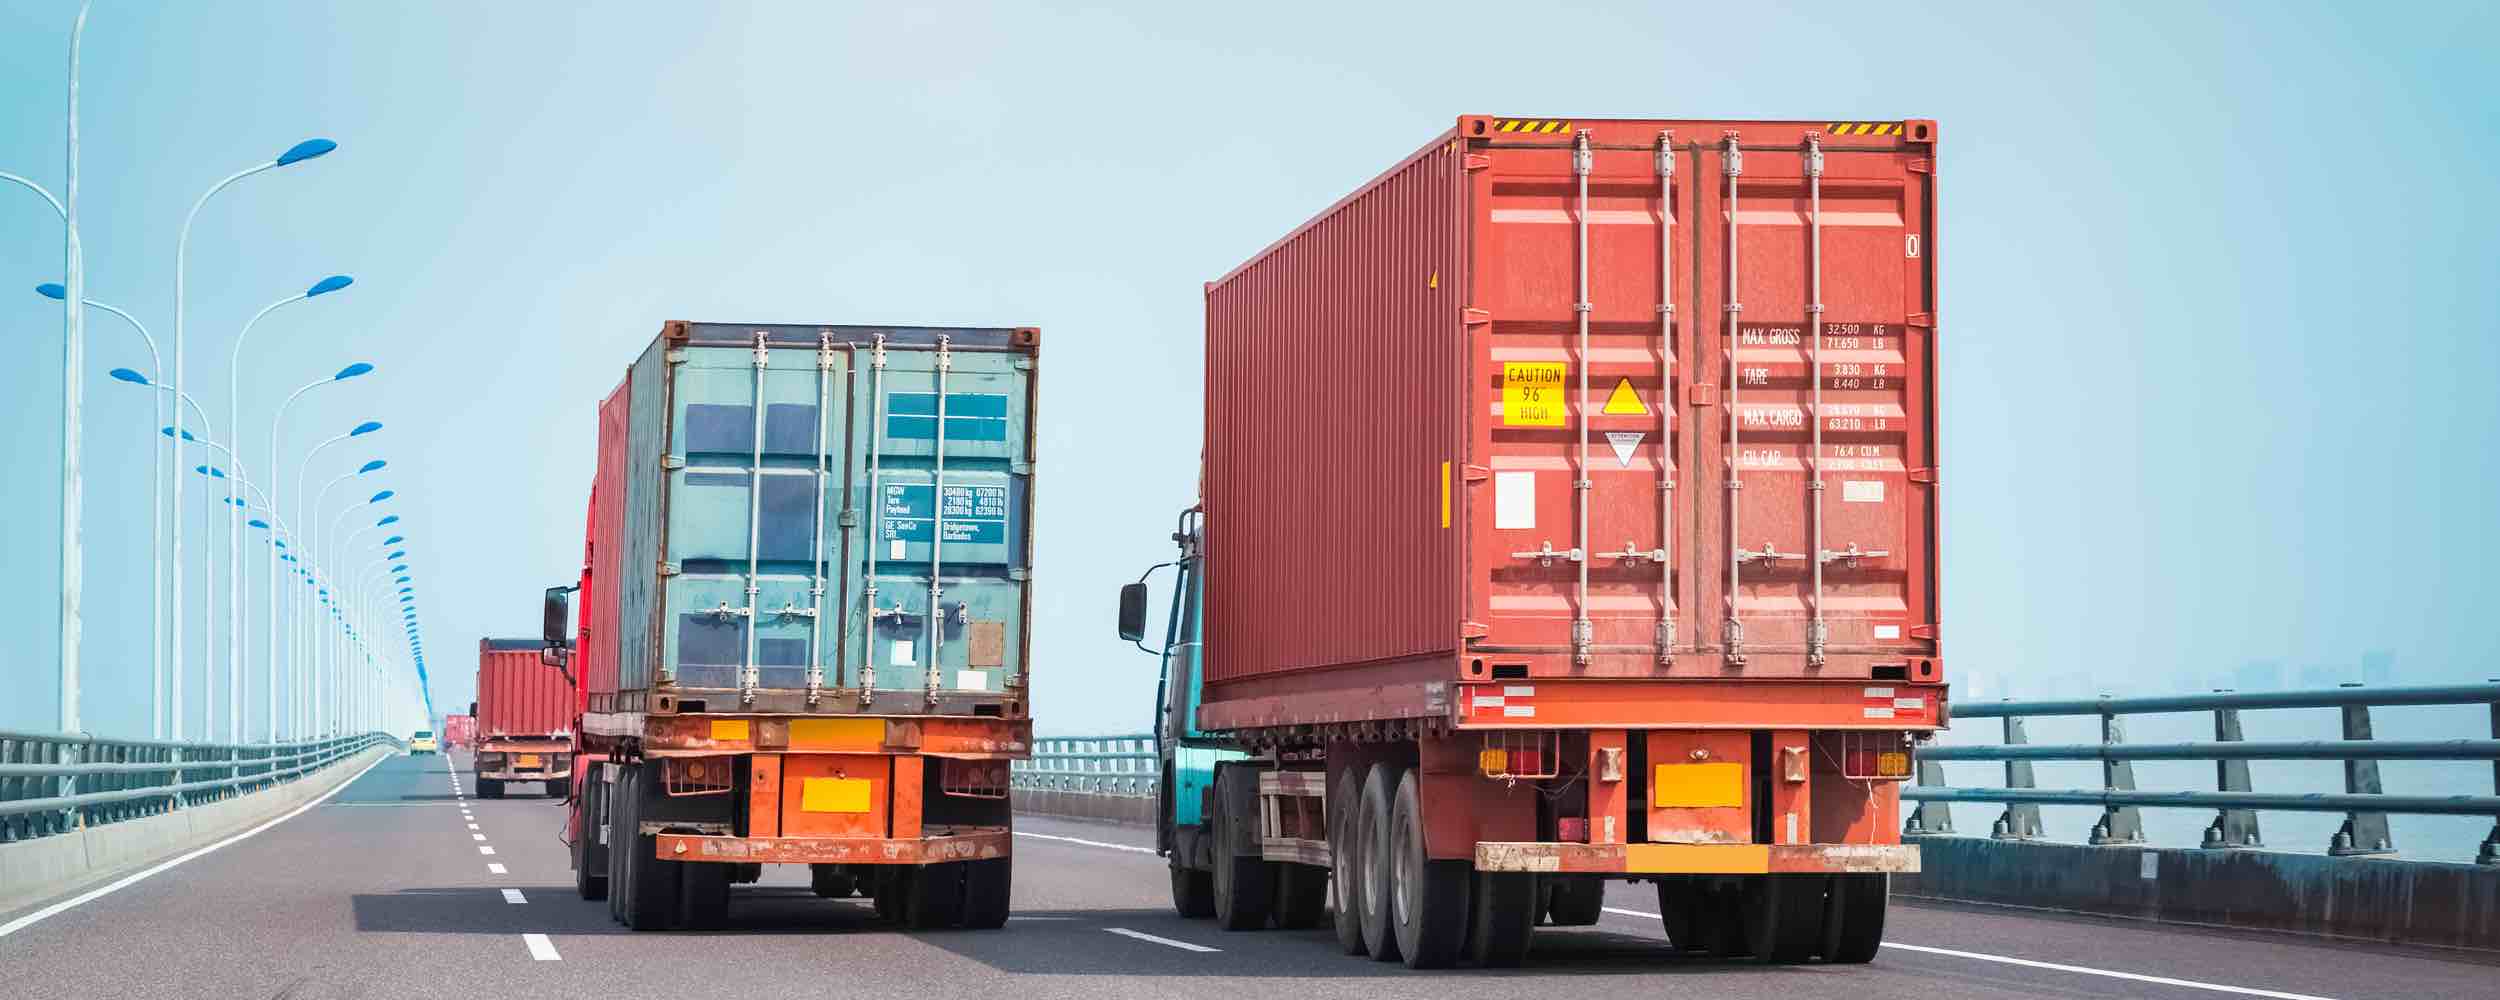 Containers being carried by a truck driver